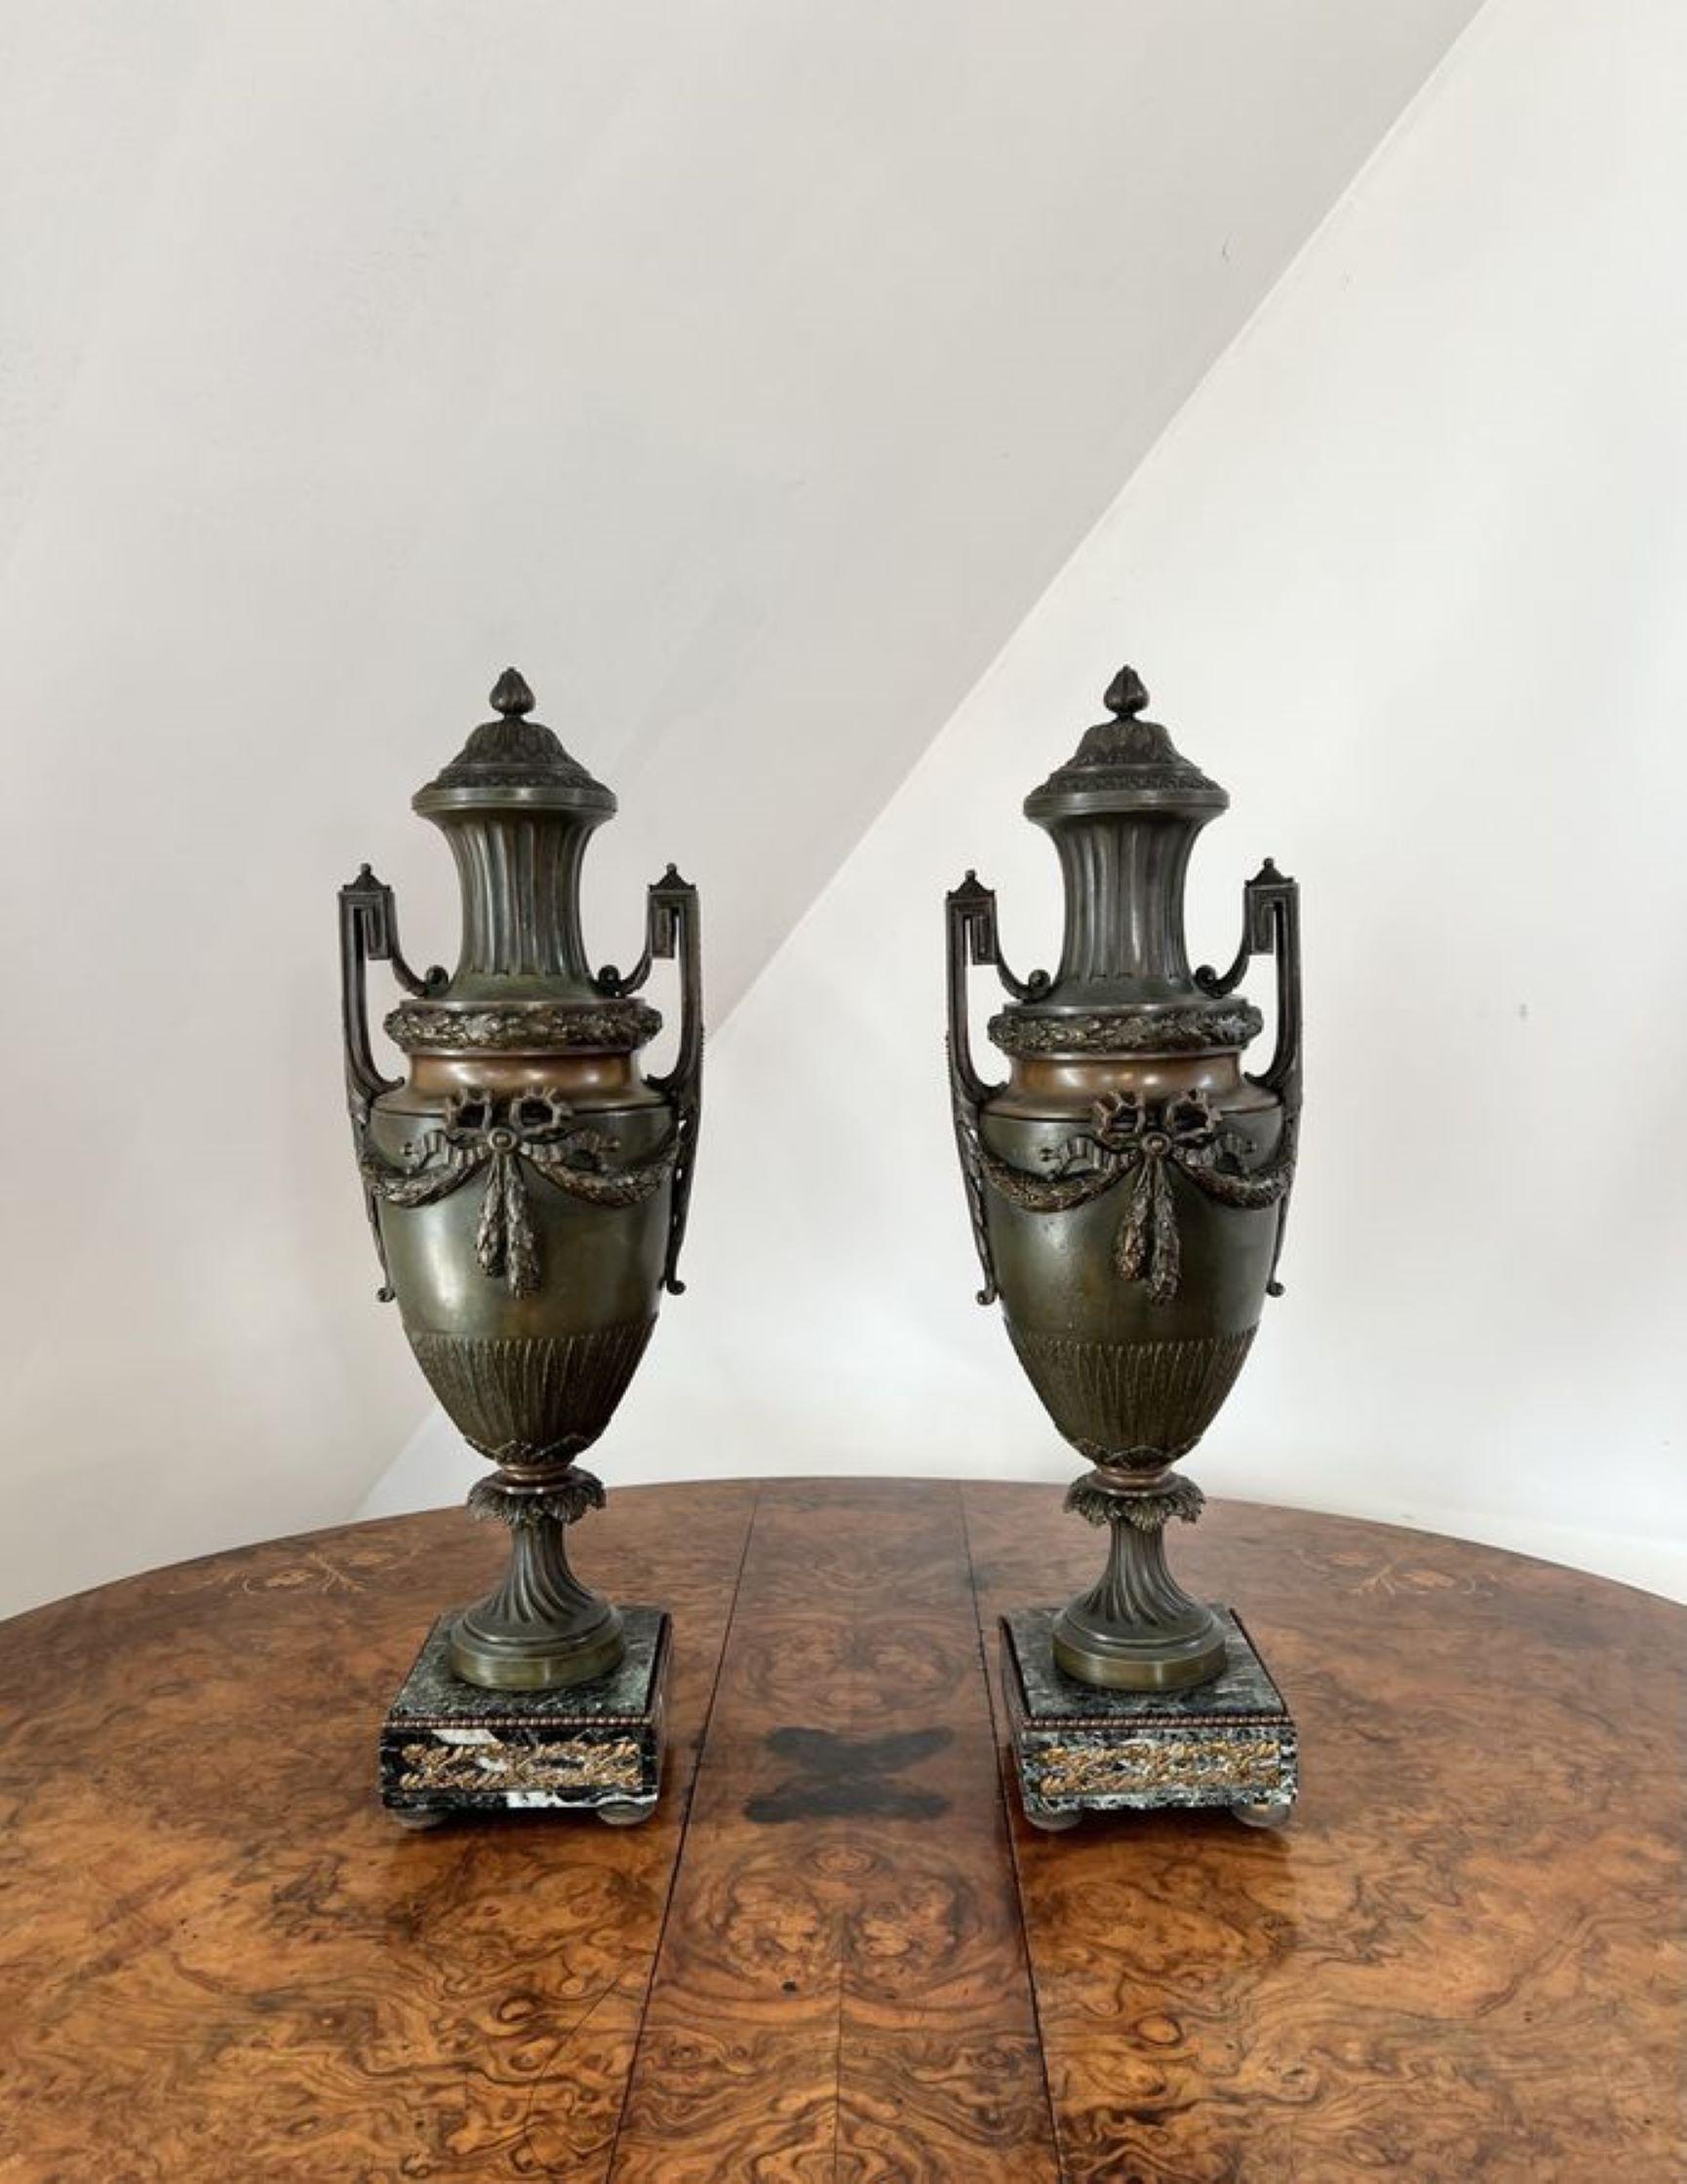 Fine quality pair of large antique Victorian bronze urns have a pair of fine quality antique Victorian bronze urns of a classical shape with twin handles, decorated with a bow to the front raised on marble bases.

D. 1860